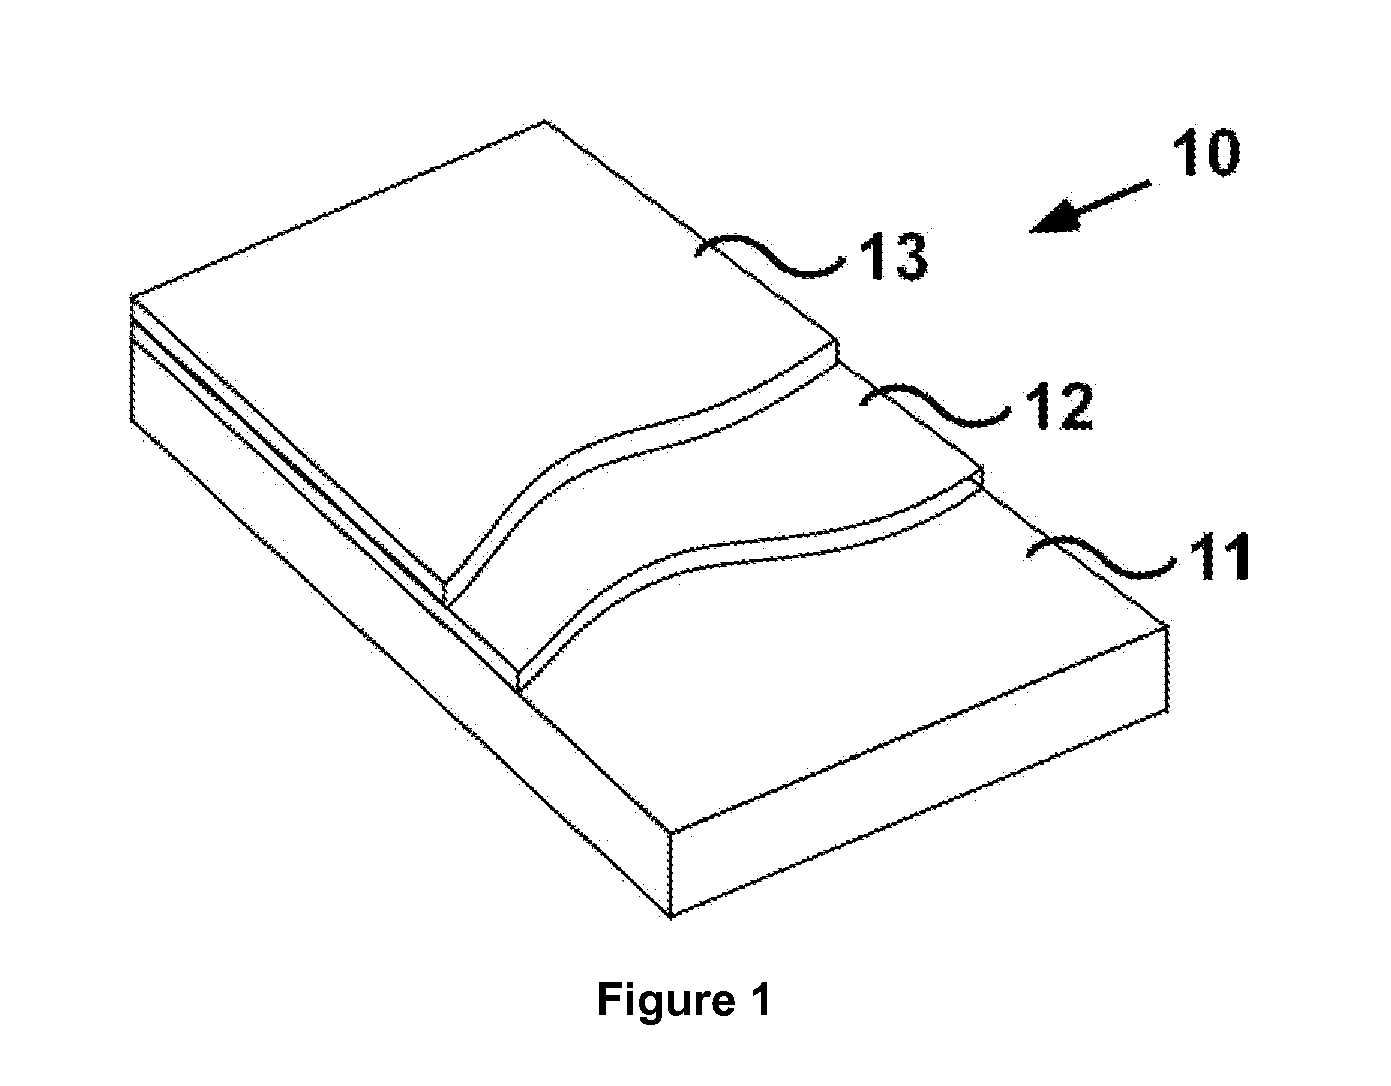 Insulated metal substrate